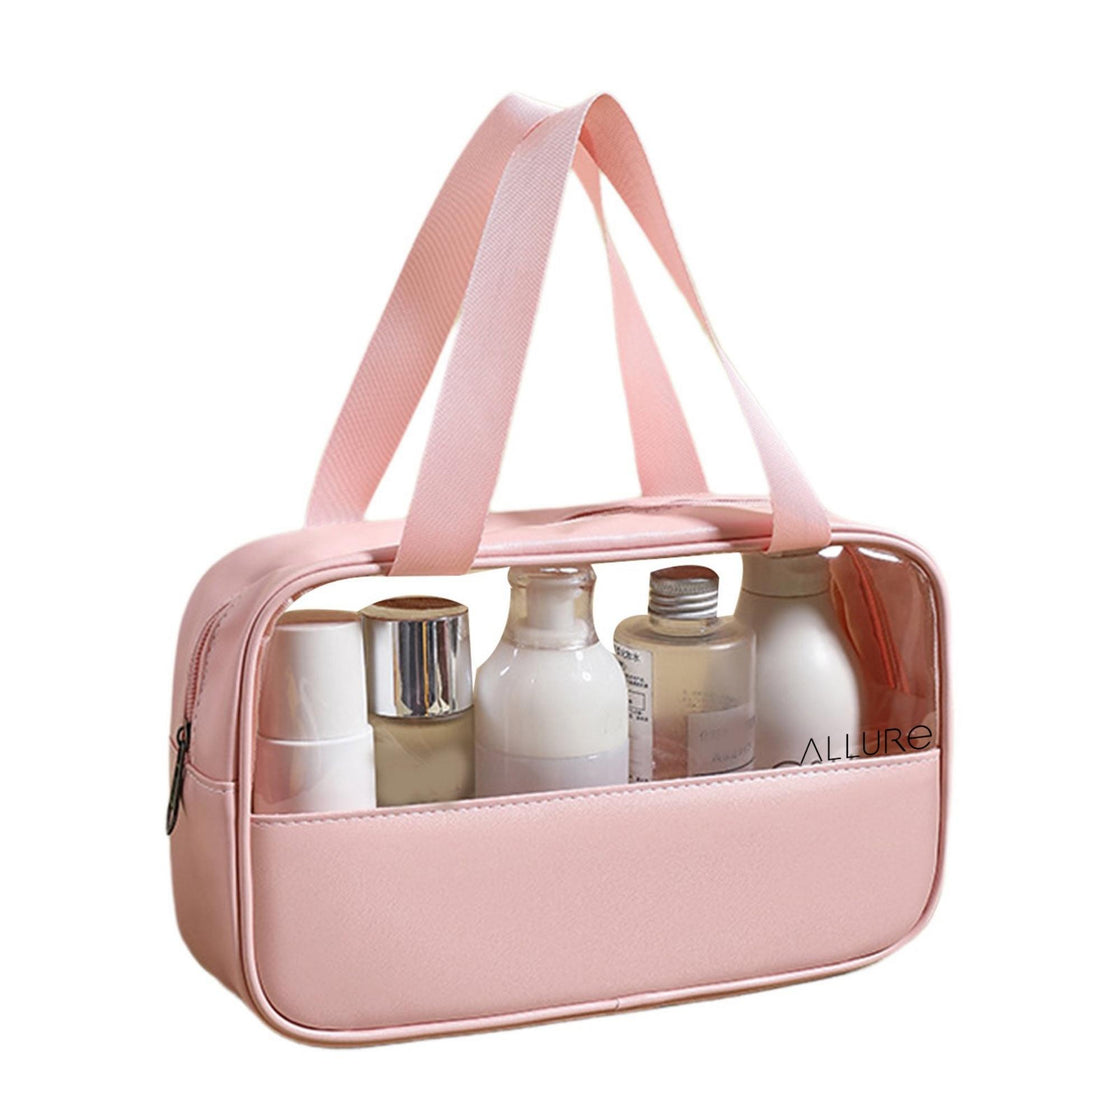 Allure Toiletry Bag large Pink